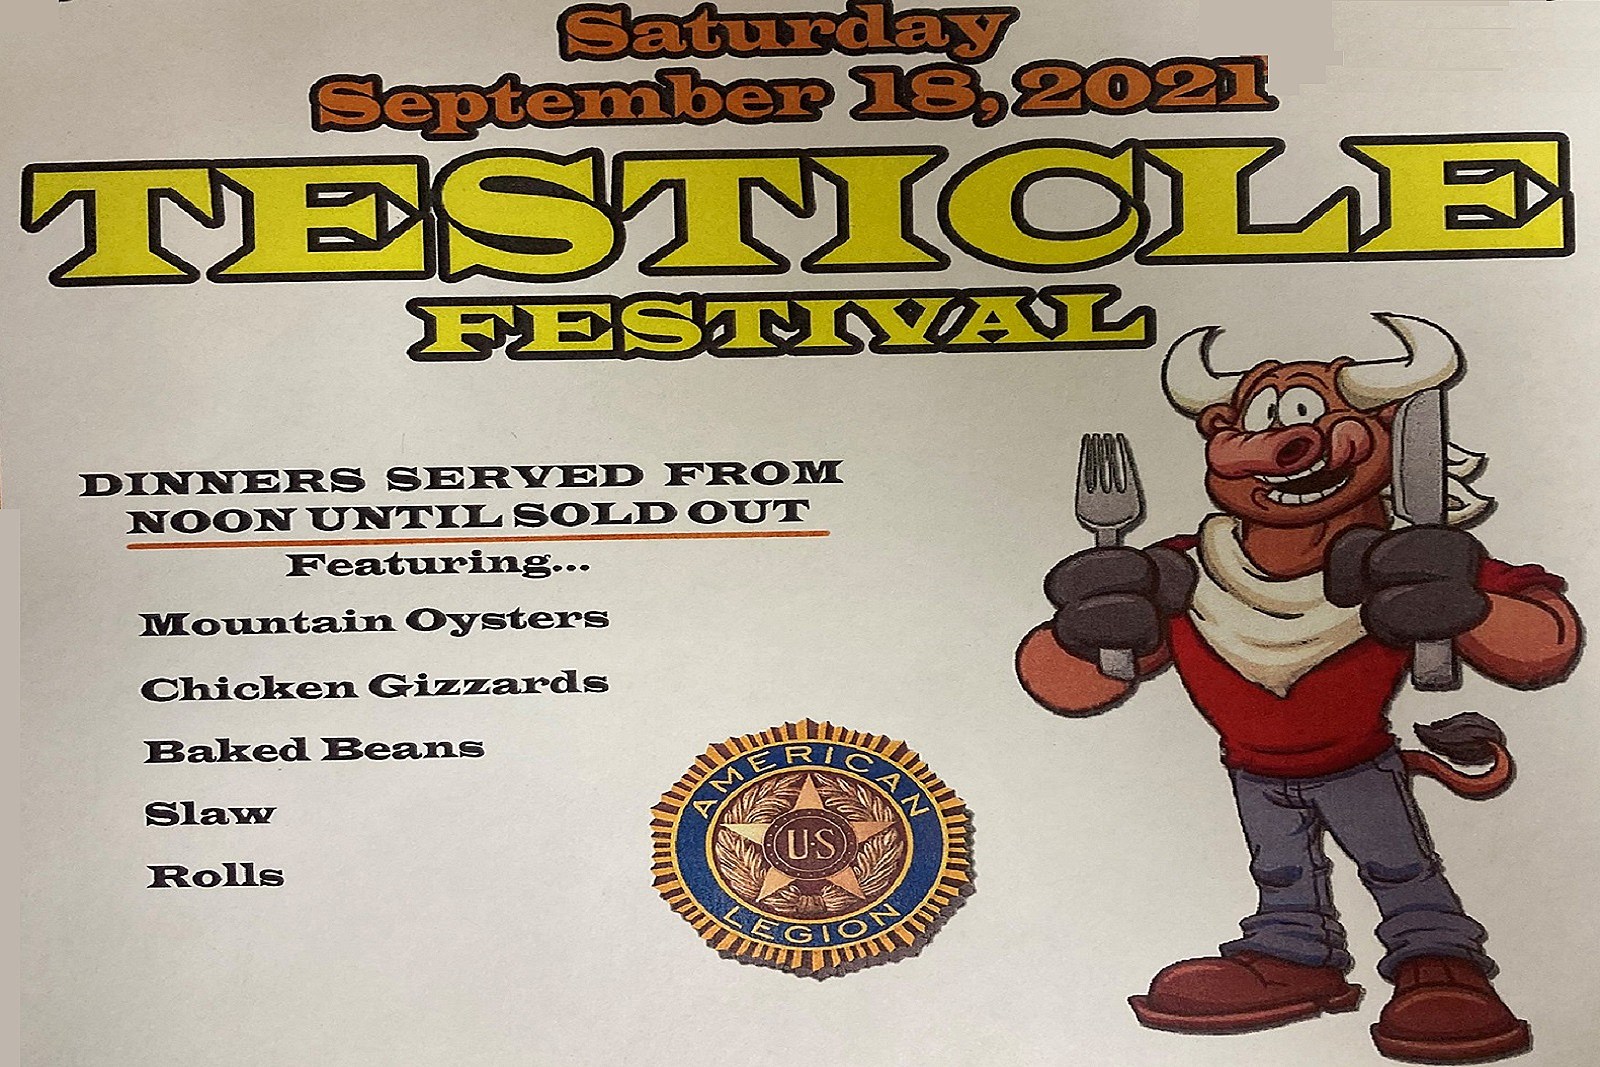 Have a Ball at Michigan's Testicle Festival